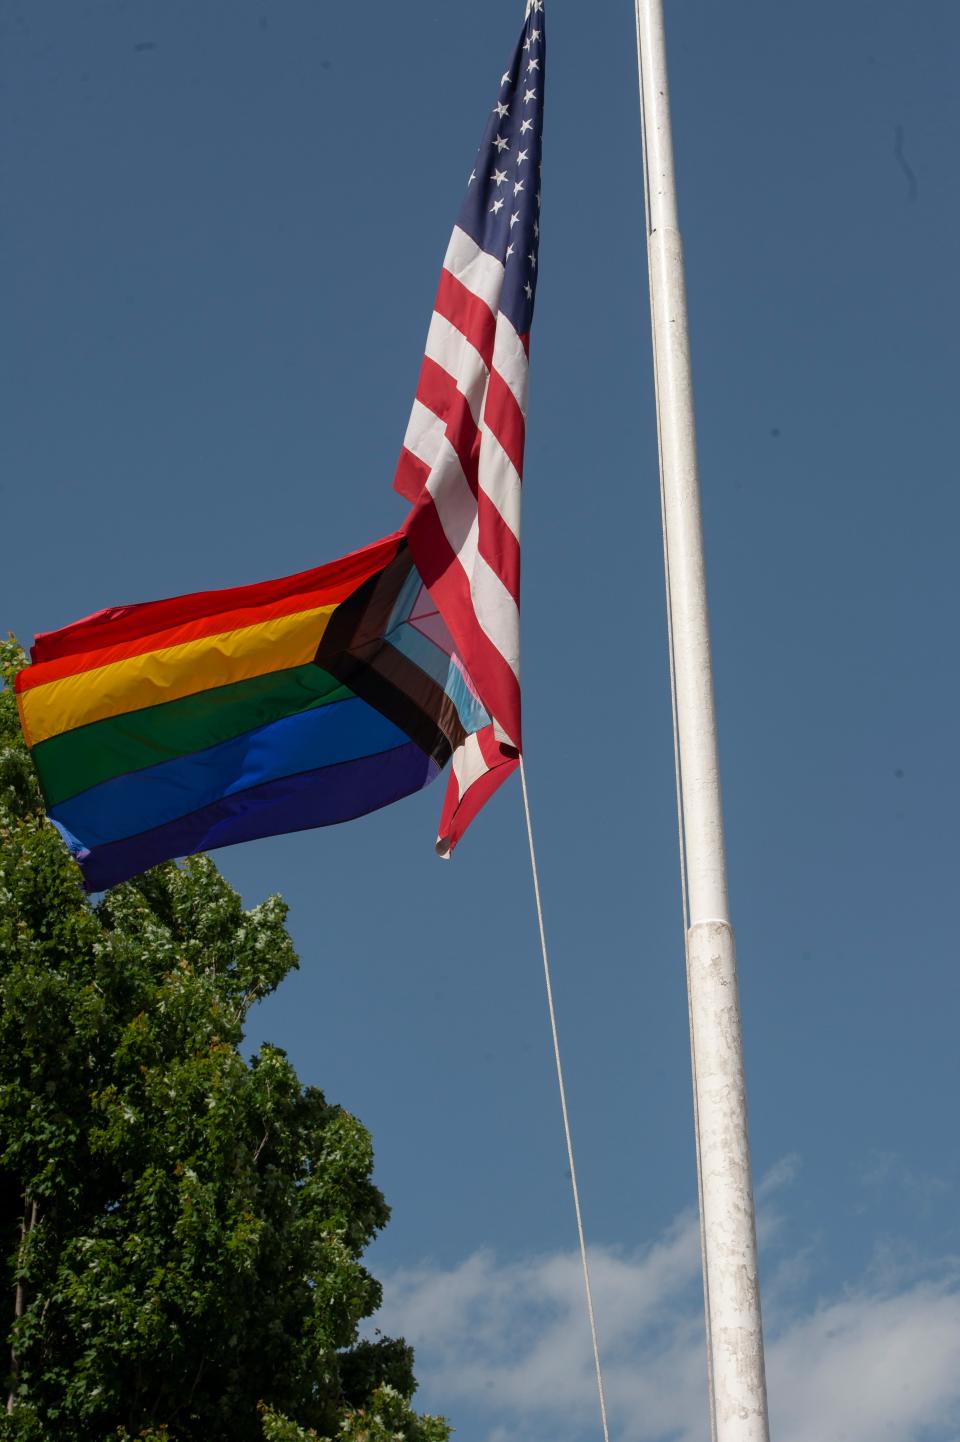 The redesigned Progress Pride flag flies outside the Memorial Building during the 4th annual Pride Ceremony in Framingham, June 4, 2022. The City Council’s Ordinances and Rules subcommittee has voted to send to the full council a proposal to limit what flags the city can fly on public buildings unless the council approves otherwise.